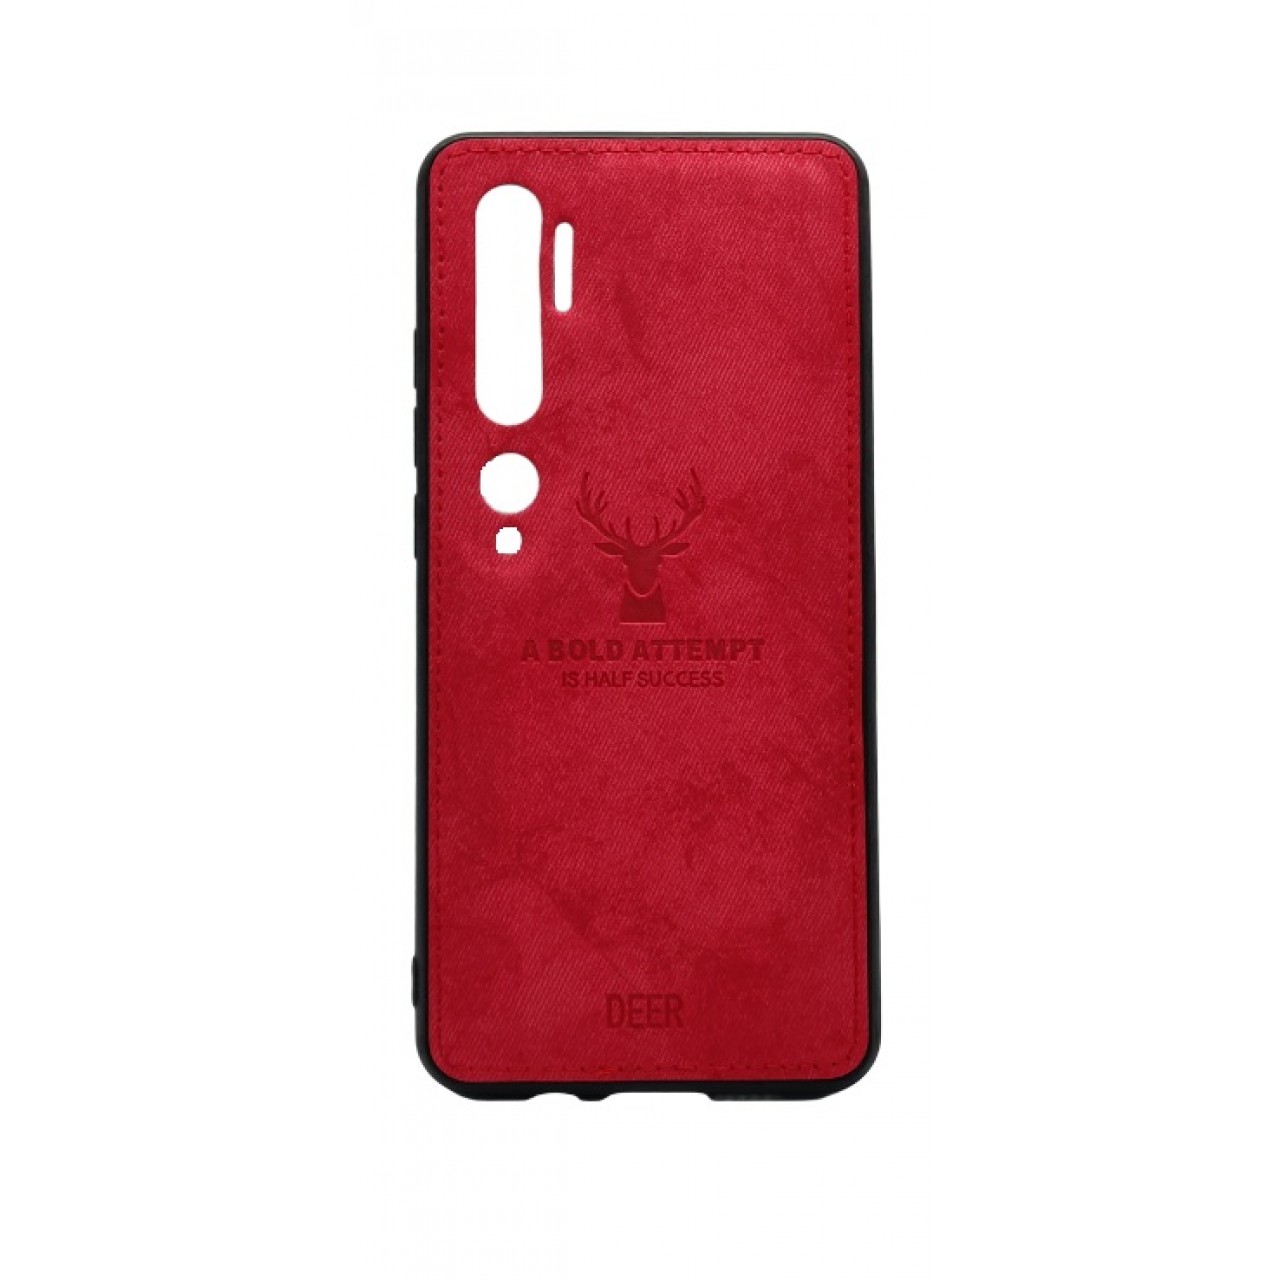 DEER CLOTH BACK CASE FOR XIAOMI Mi NOTE 10 PRO - RED